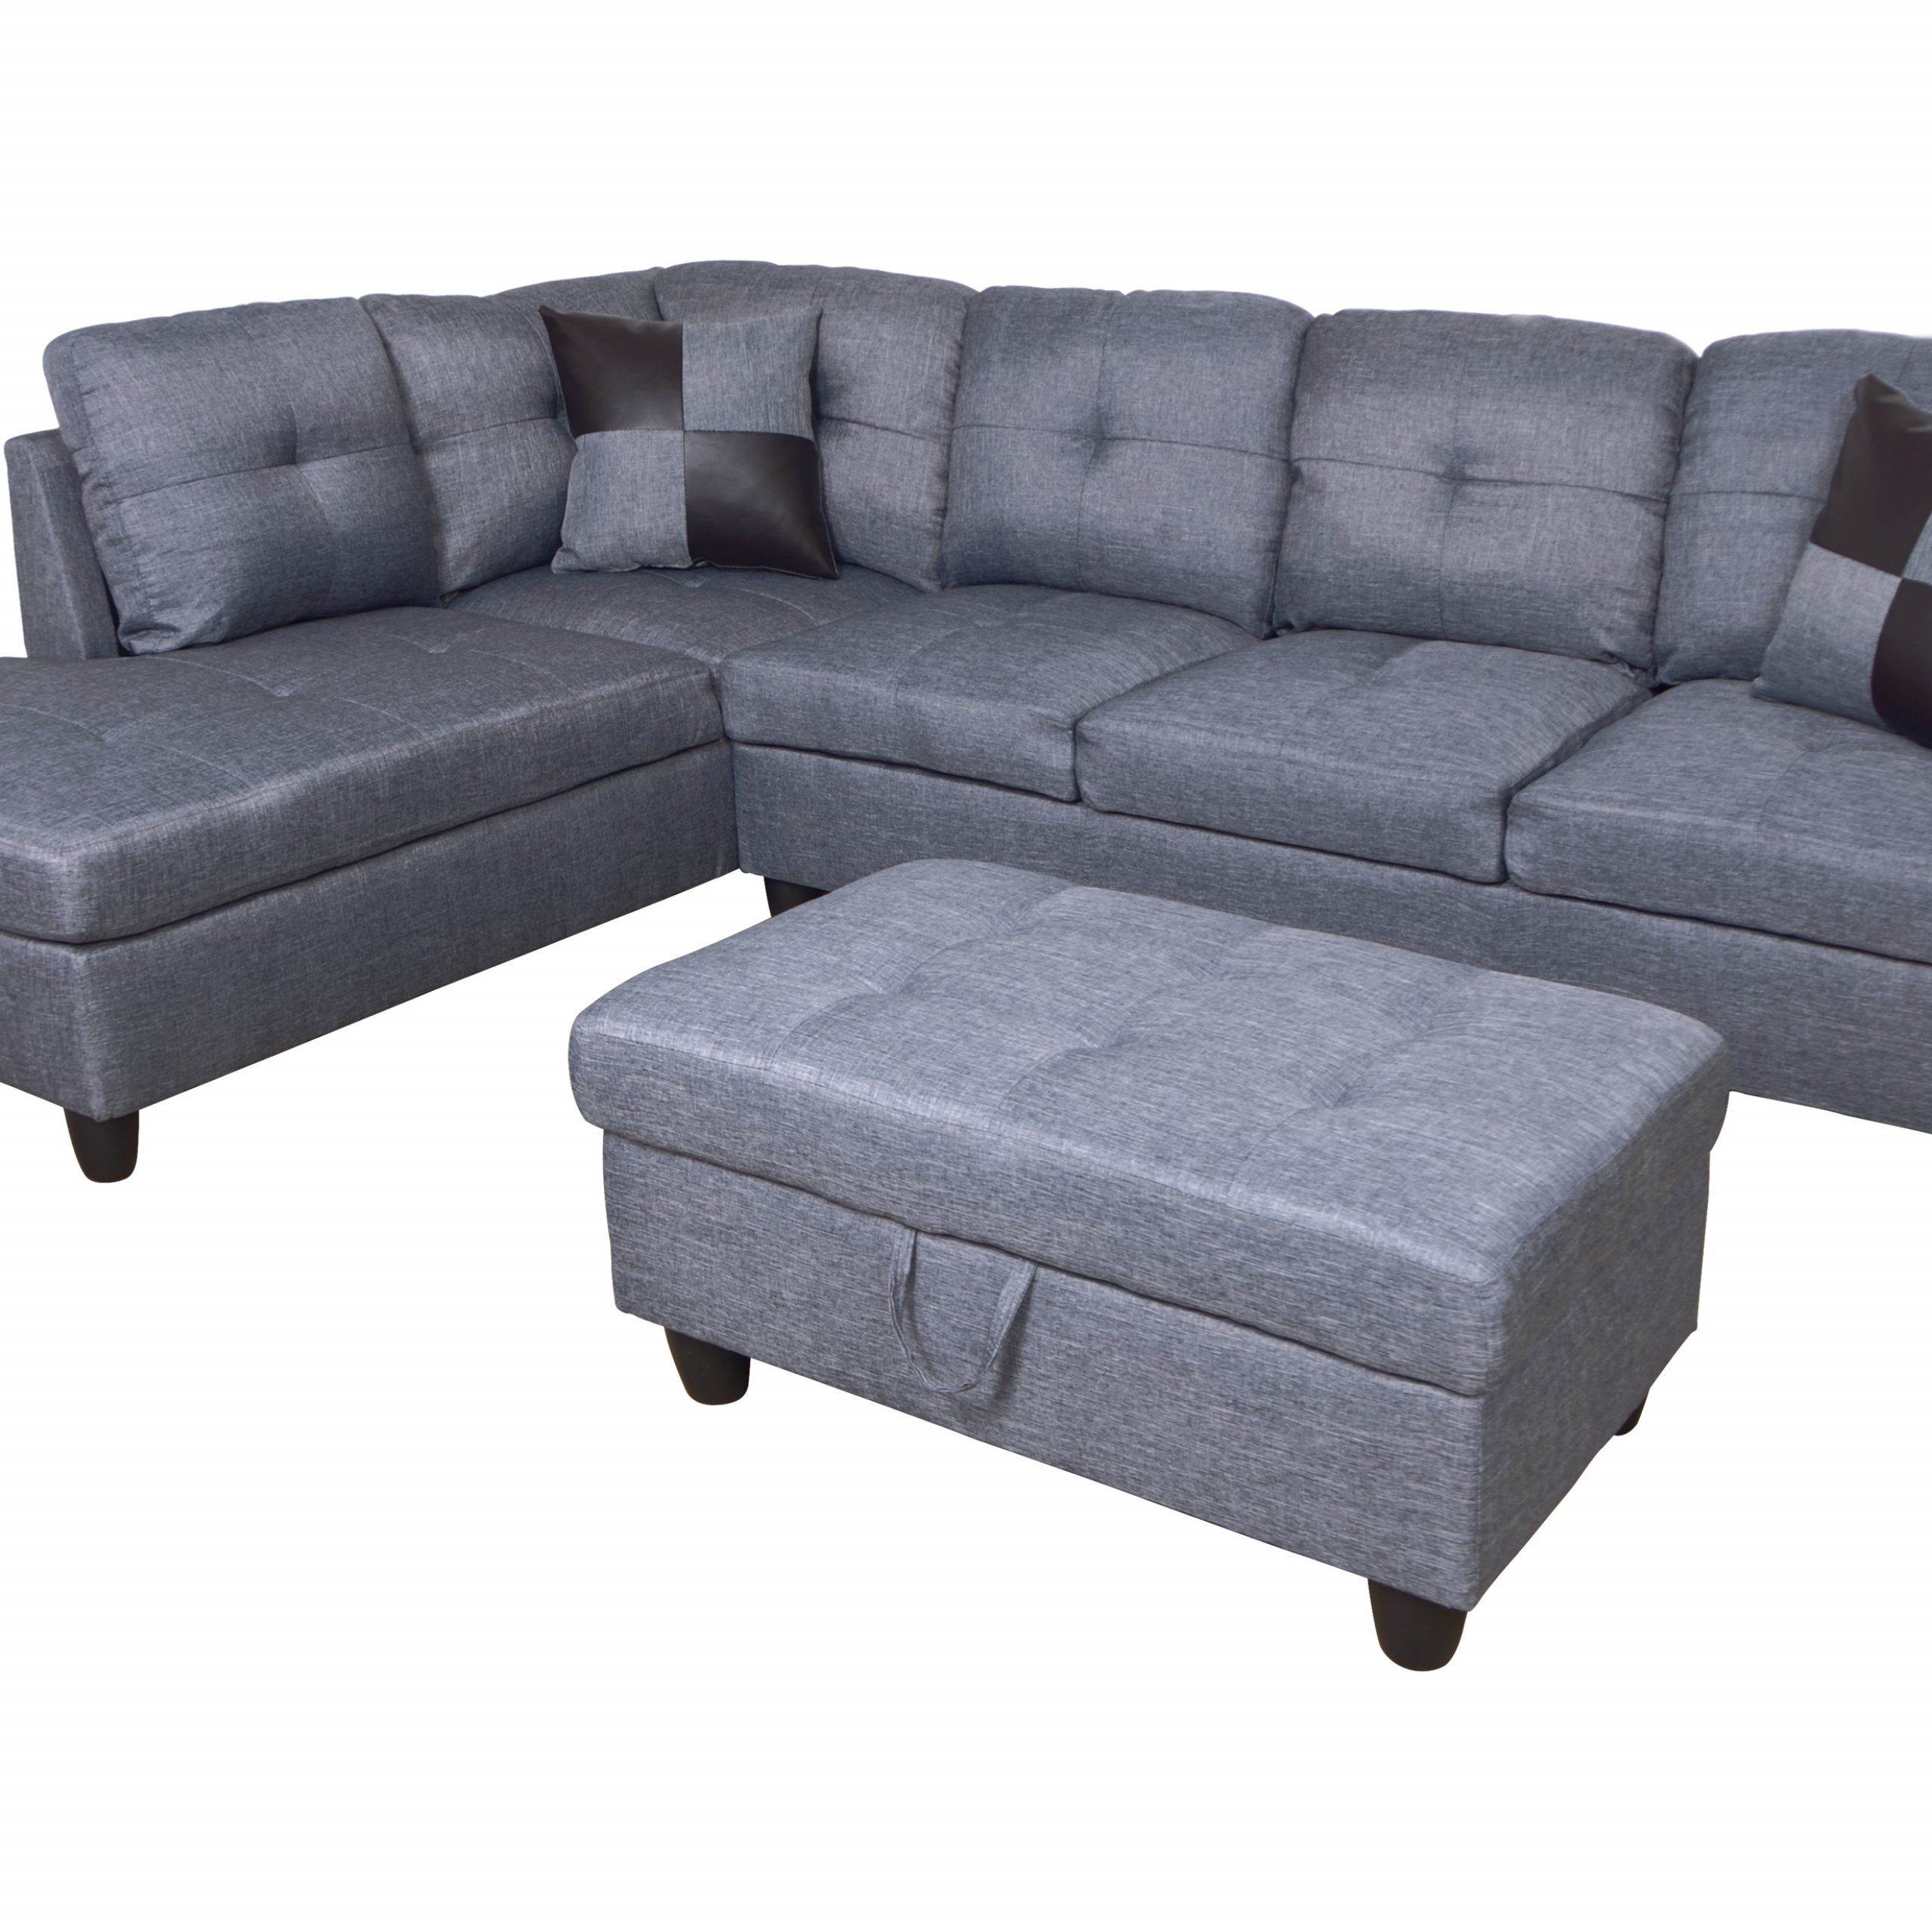 Hermann Left Chaise Sectional Sofa With Storage Ottoman Pertaining To Celine Sectional Futon Sofas With Storage Reclining Couch (View 2 of 15)